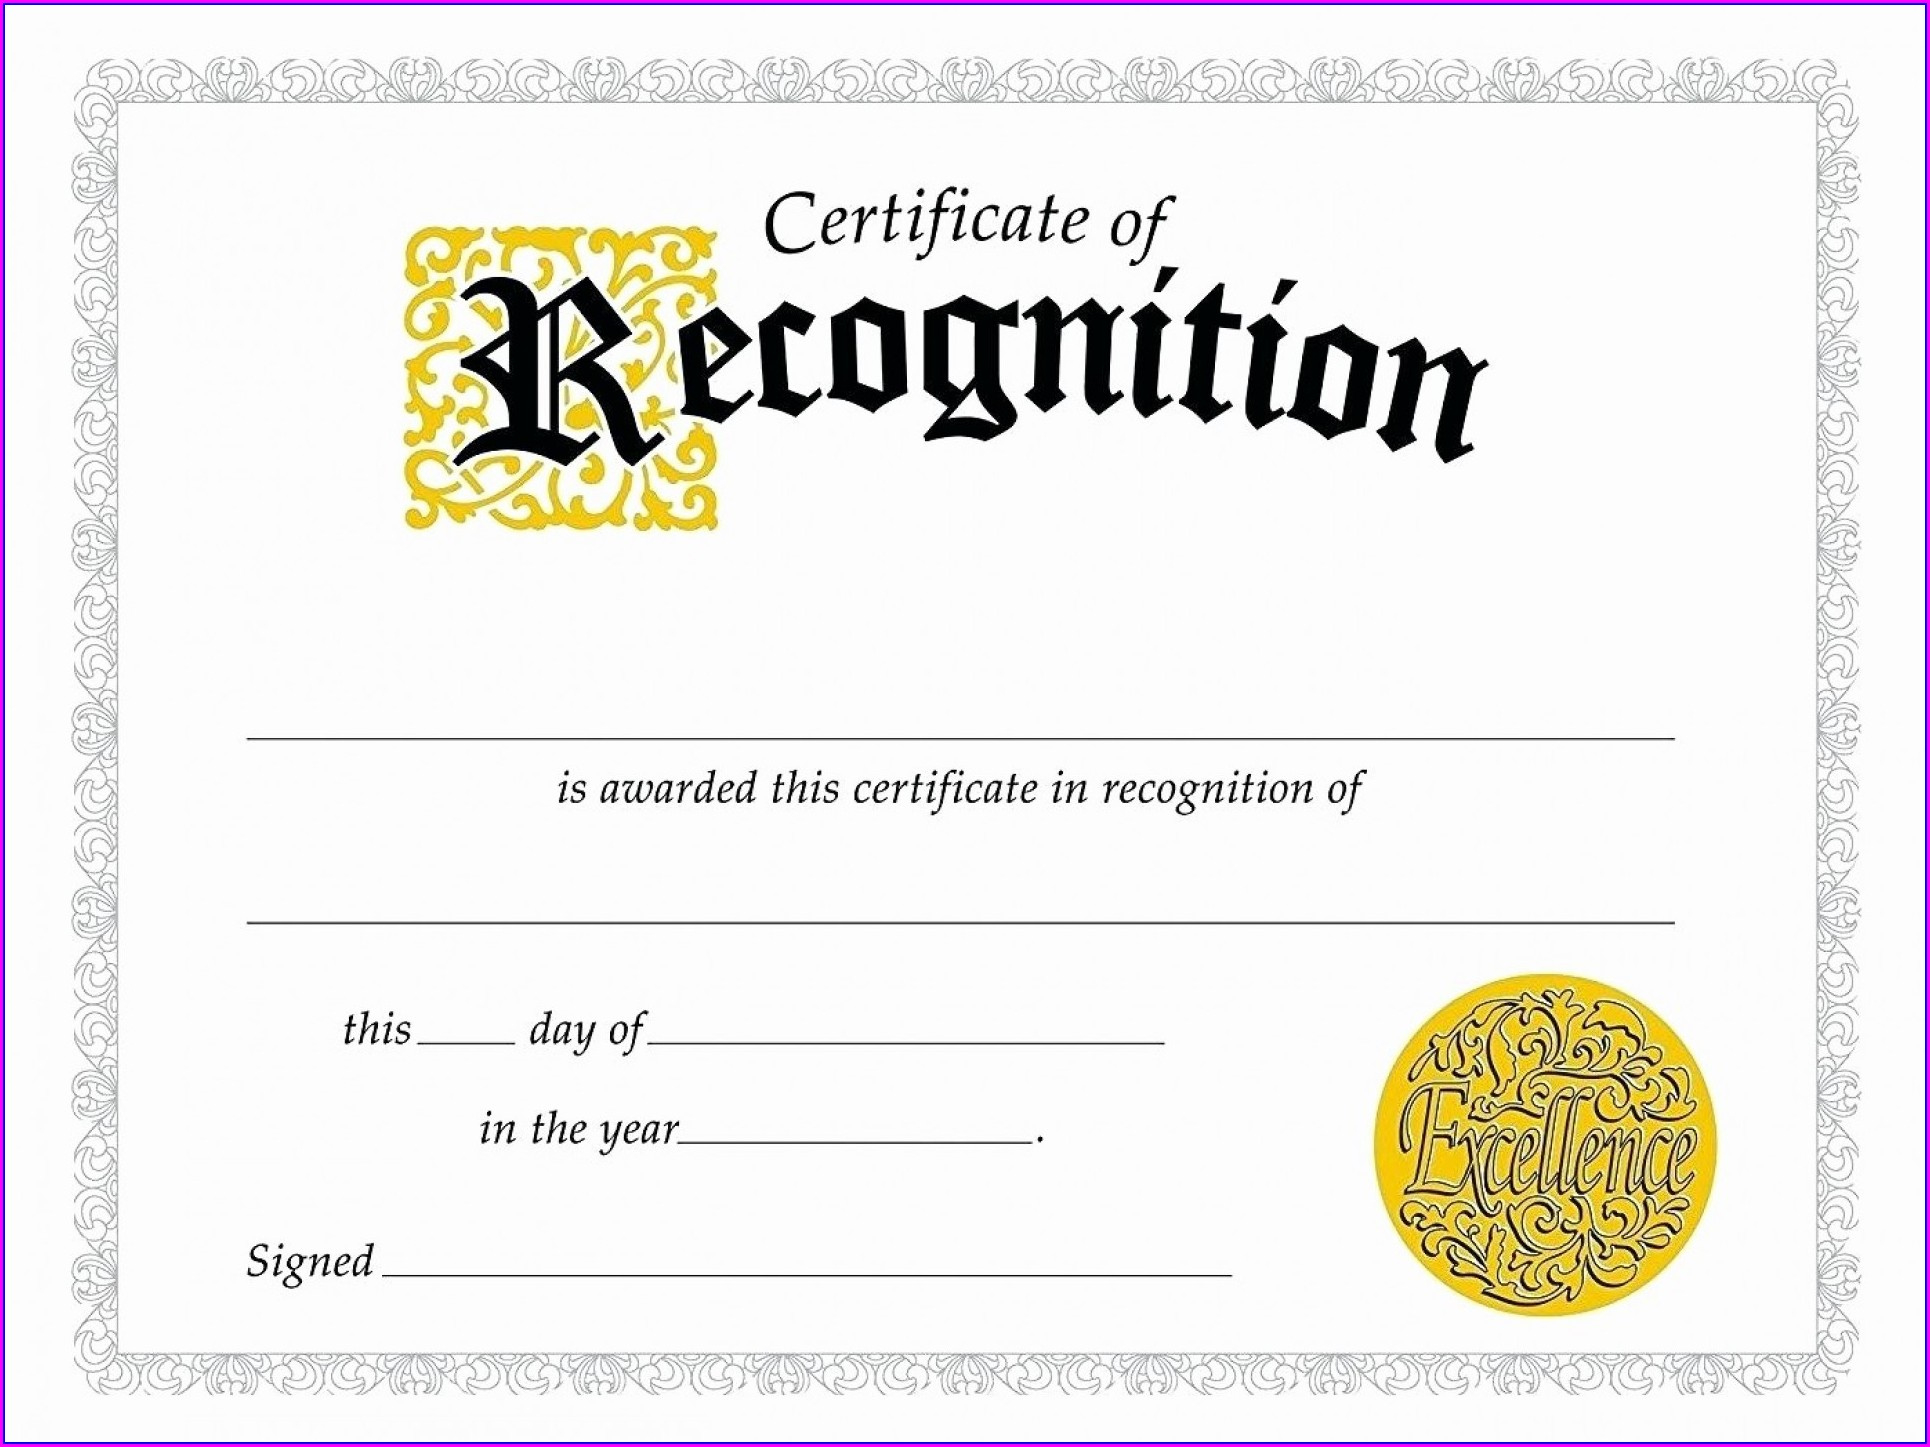 Employee Recognition Certificates Templates Free Templates within Employee Recognition Certificates Templates Free